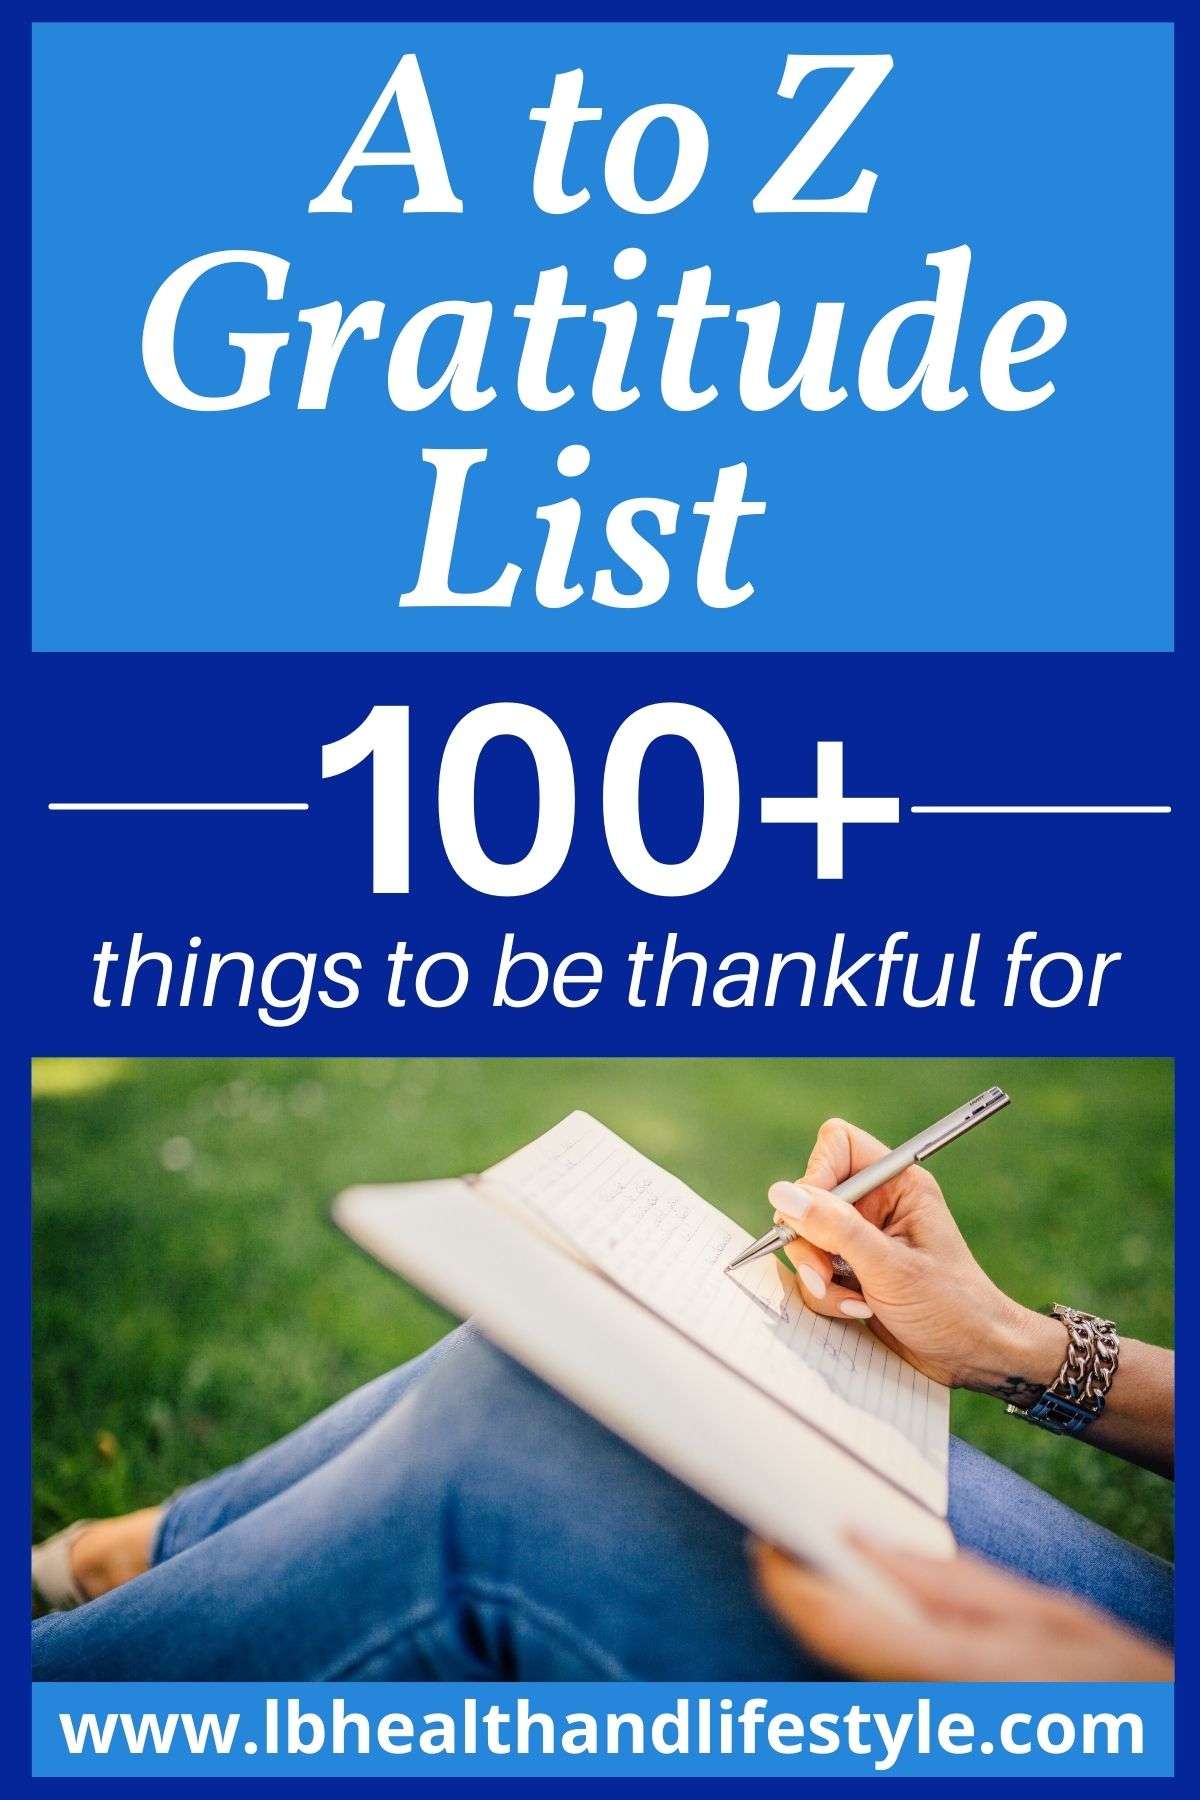 A to Z gratitude list 100+ things to be thankful for